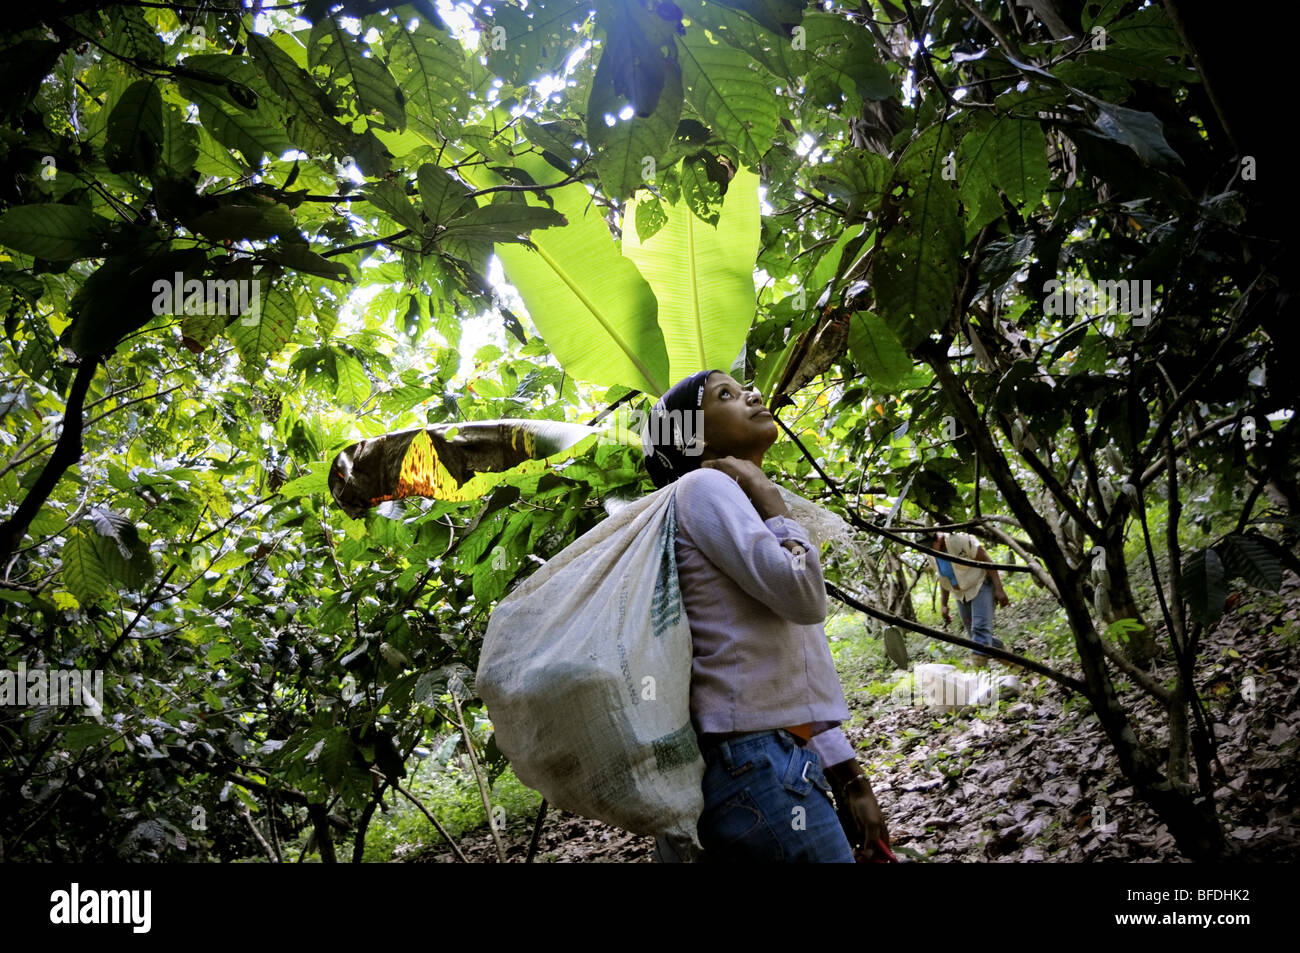 A young woman picks cacao pods (Theobroma cacao) among lush, green trees and vegetation in Choroni, Venezuela. Stock Photo